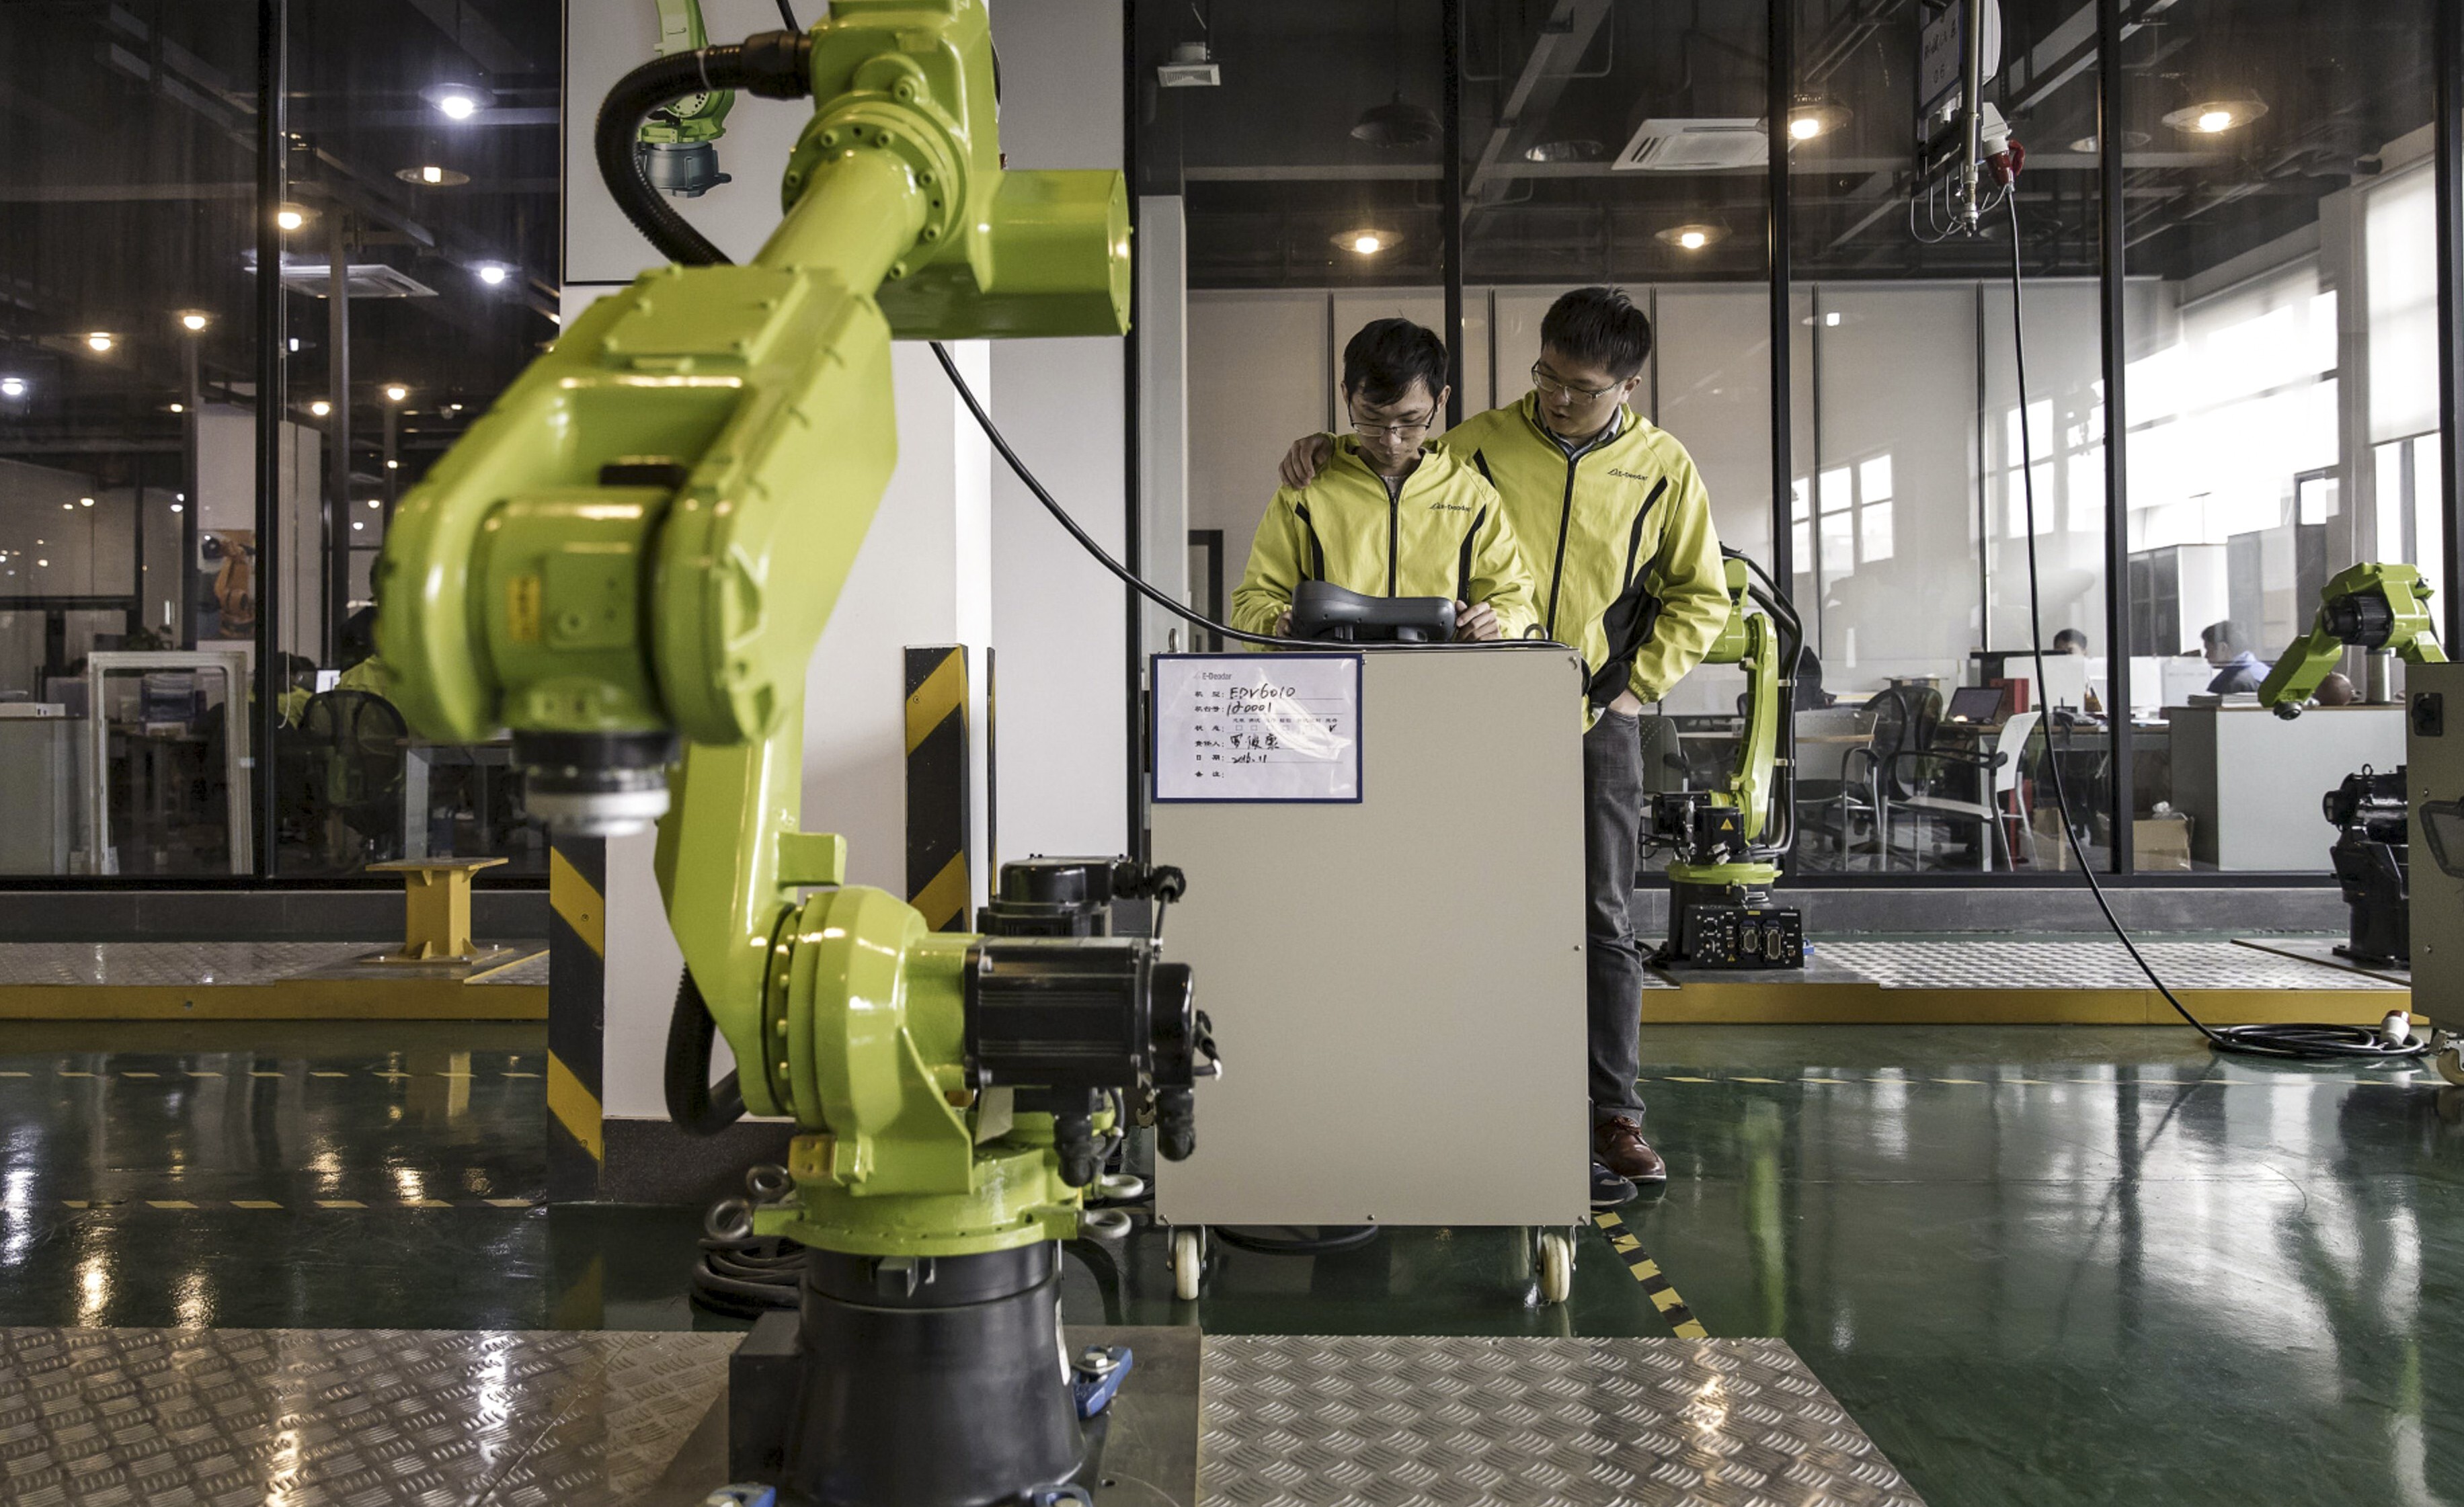 Technicians test robots in a E-Deodar Robot Equipment Co factory in Foshan, a part of the Greater Bay Area, on February 28, 2017. The Greater Bay Area is where the future of finance and technology is being written and start-ups in the Asean region can learn from its experiences. Photo: Bloomberg